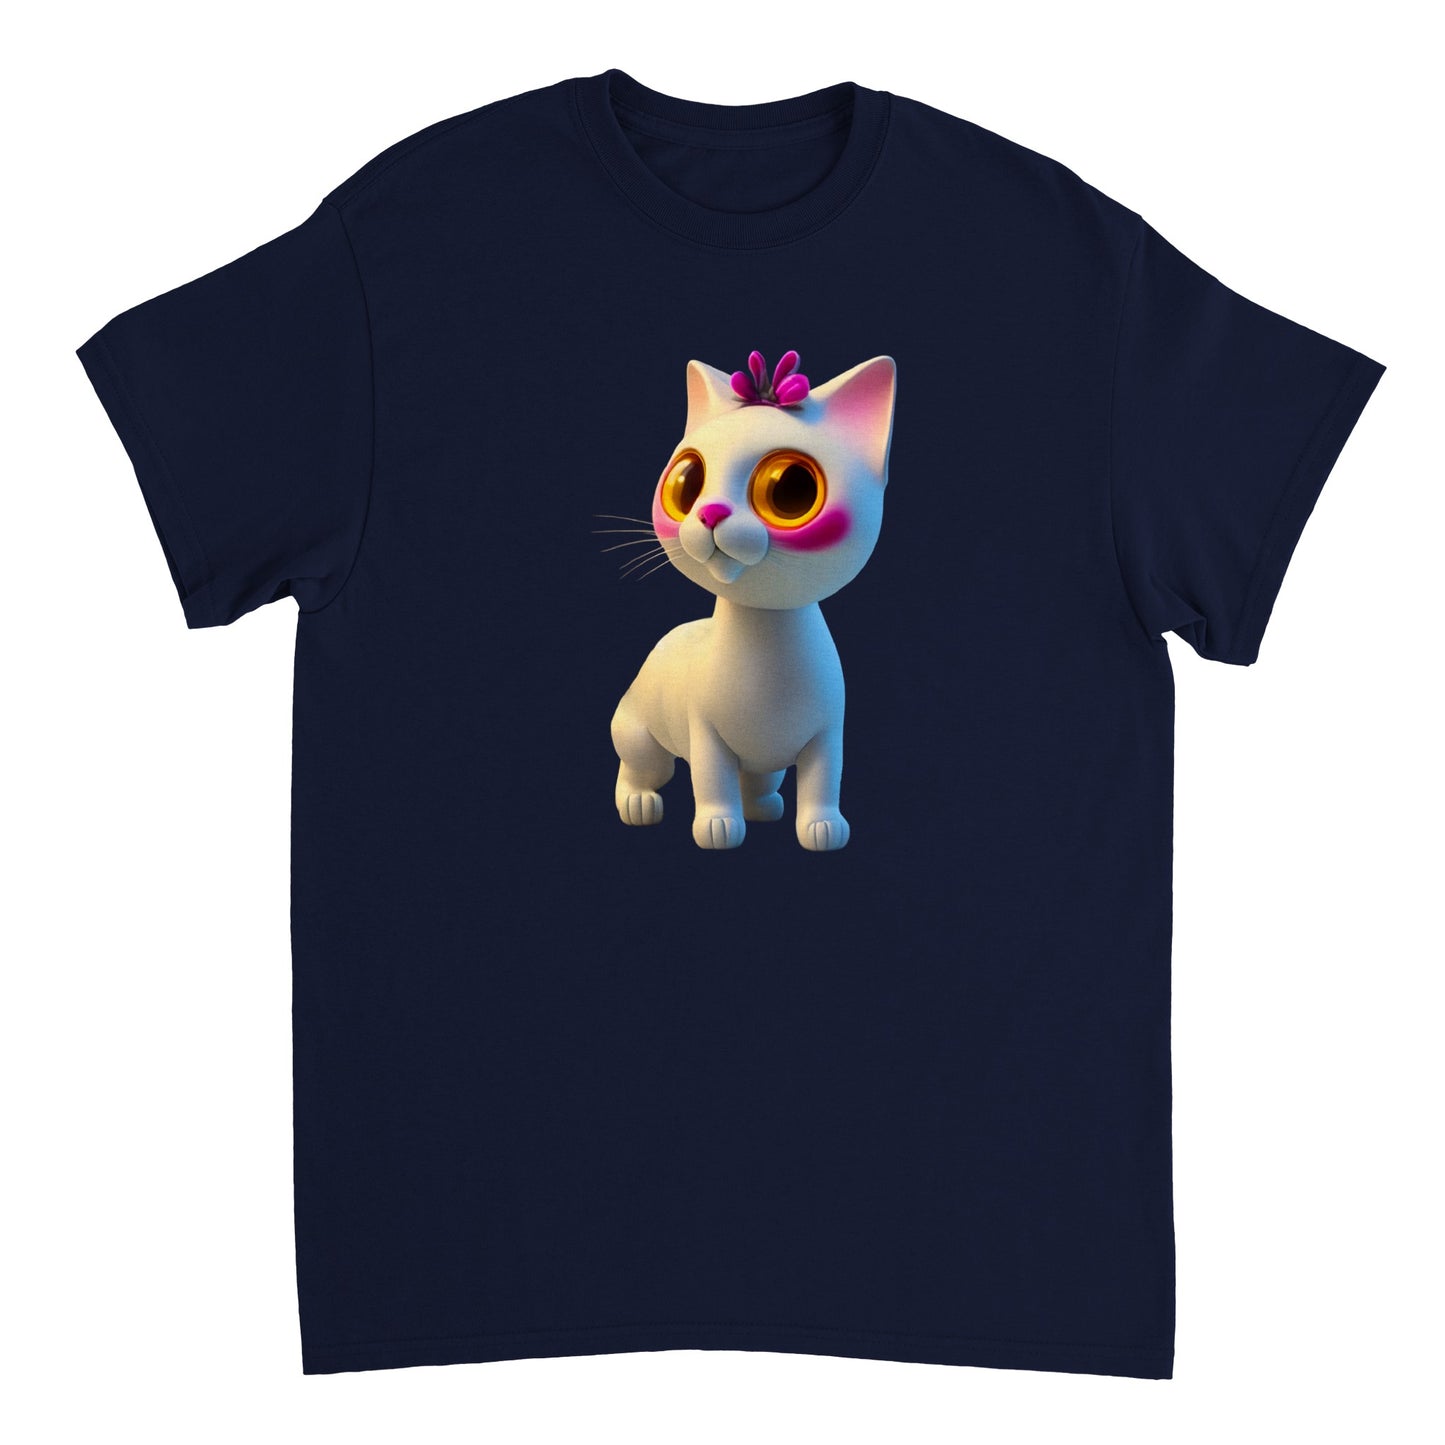 Adorable, Cool, Cute Cats and Kittens Toy - Heavyweight Unisex Crewneck T-shirt 47